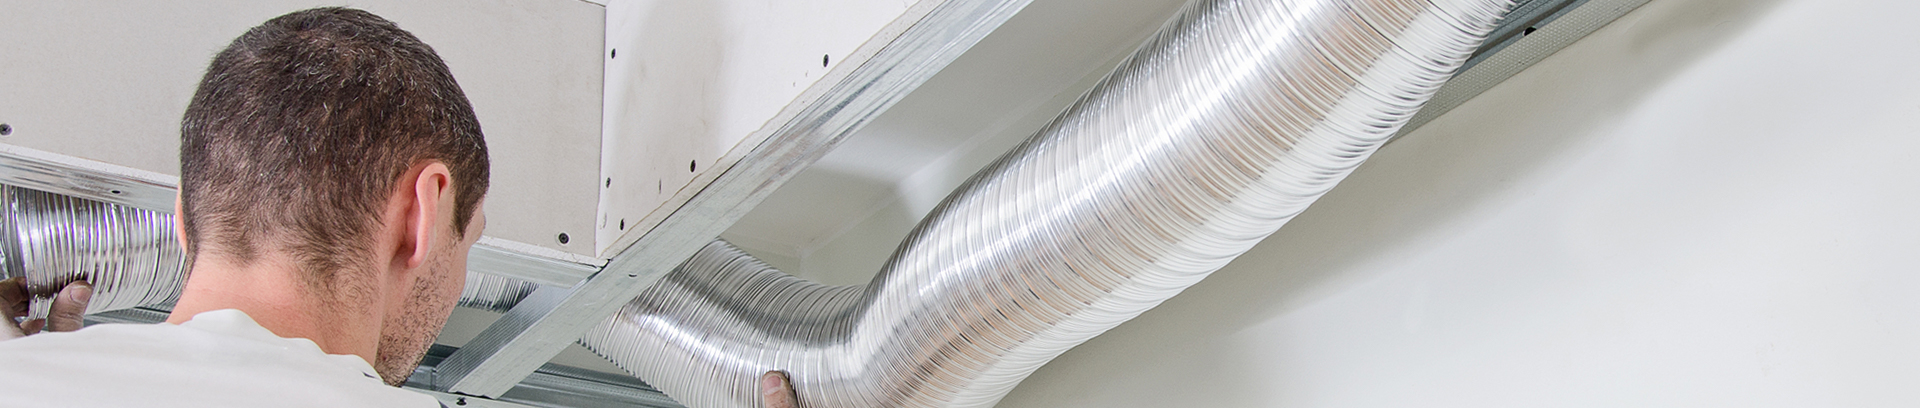 image of a man working with an air duct